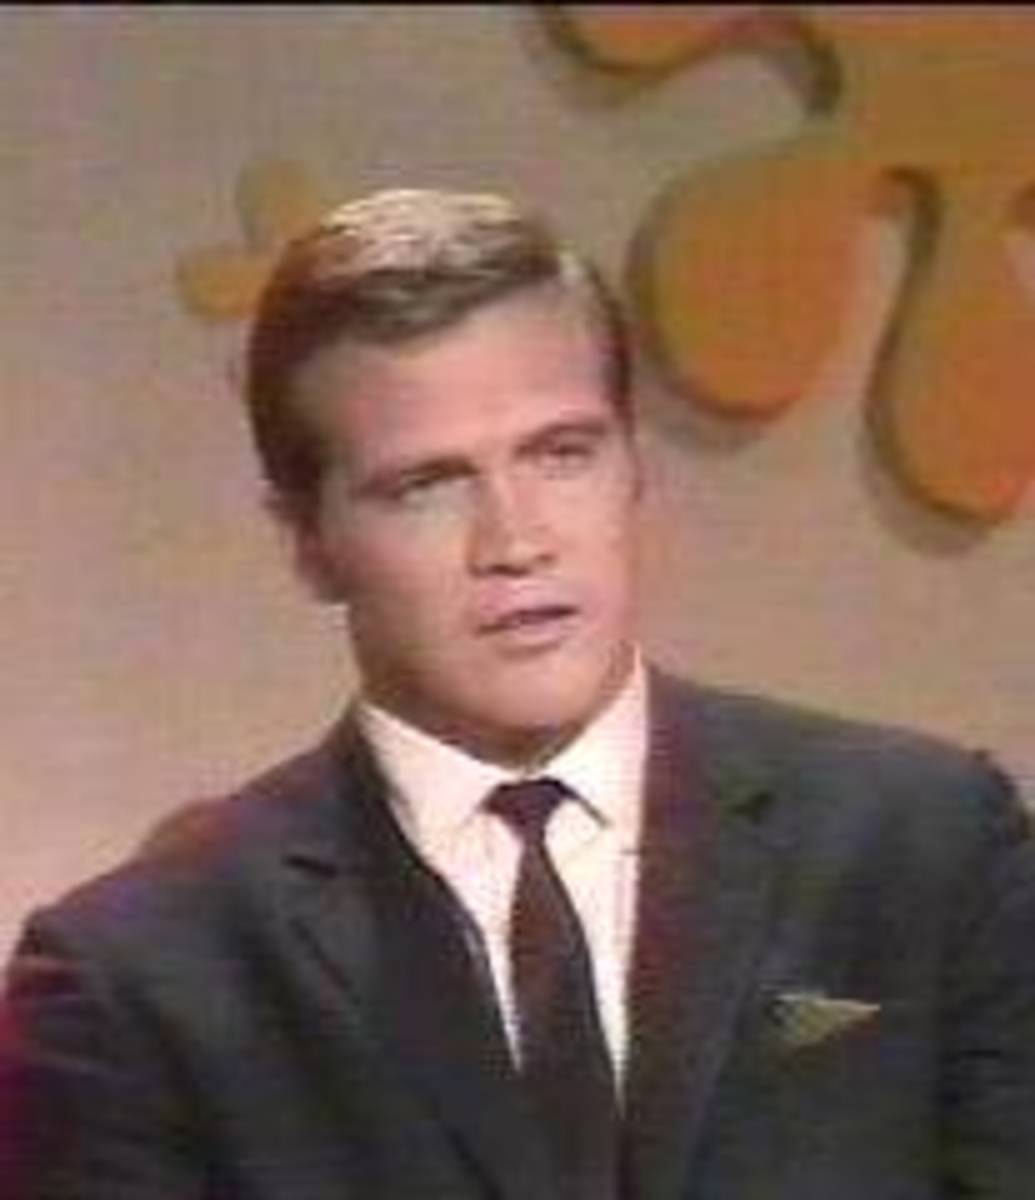 LEE MAJORS star of The Big Valley and Six Million Dollar Man once appeared on The Dating Game, which served as a springboard for up and coming actors in Hollywood.